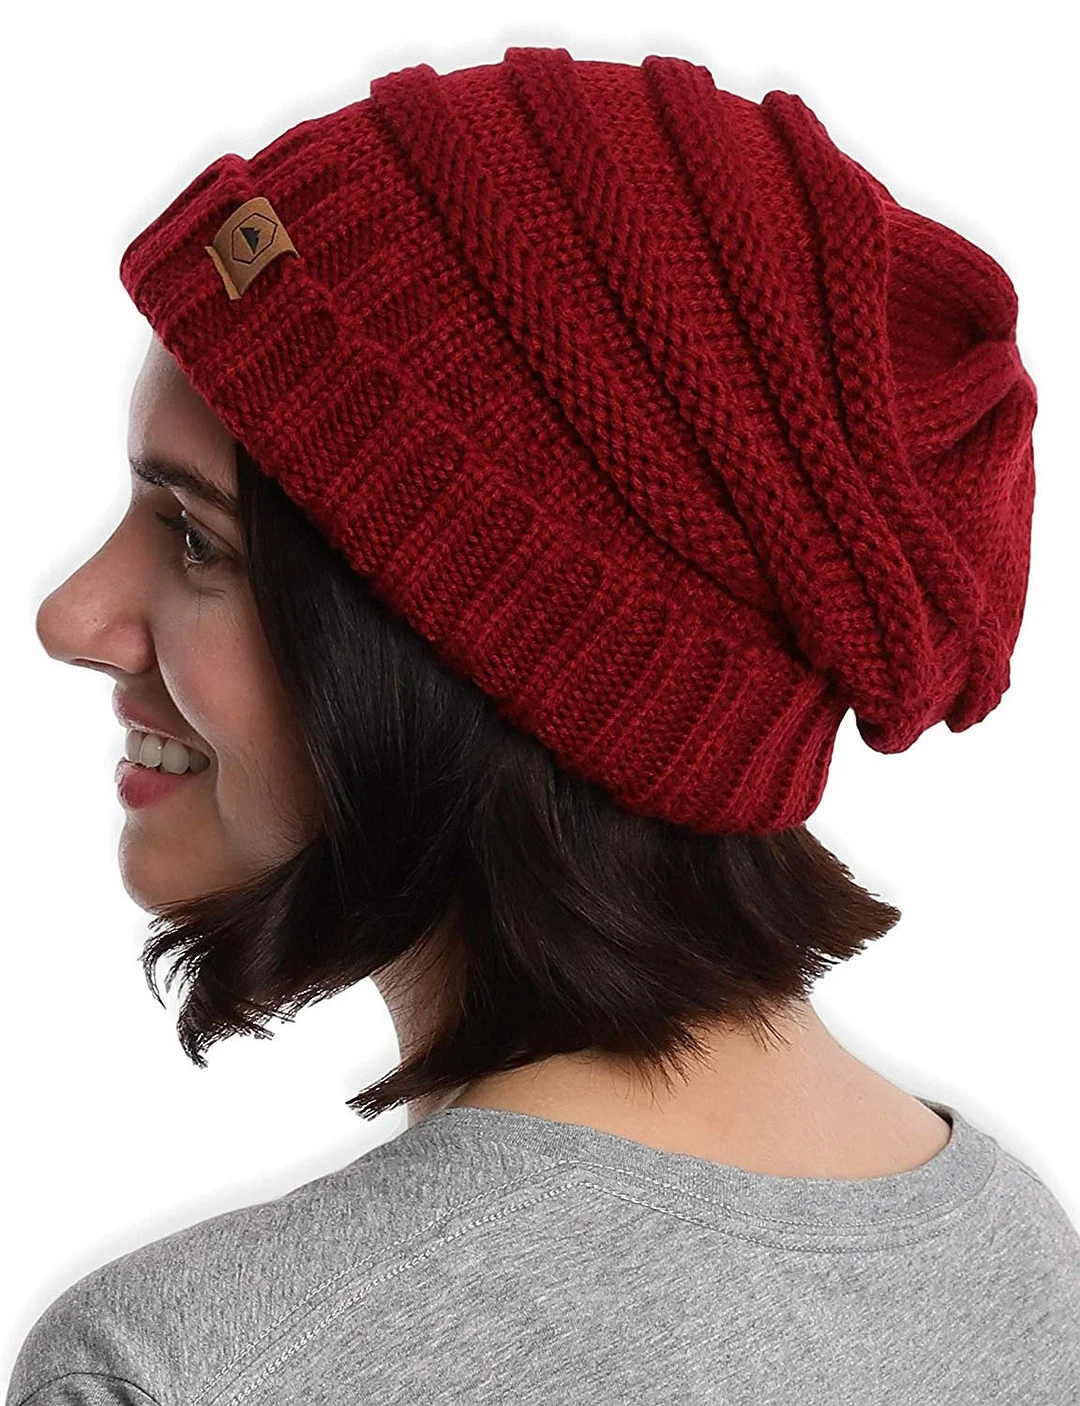 Warm & Cute Oversized Slouch Beanie Winter Hats - Thick, Chunky & Soft Stretch Knitted Caps for Cold Weather